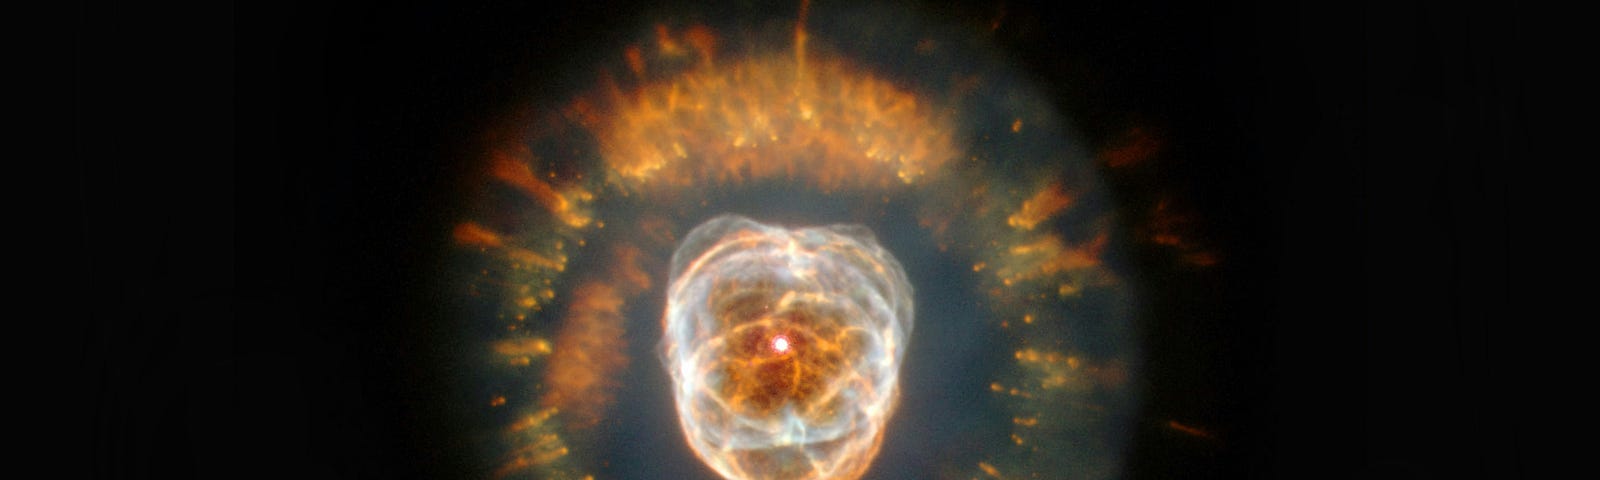 The Clown-faced Nebula as seen by the Hubble Space Telescope. We are eternity.